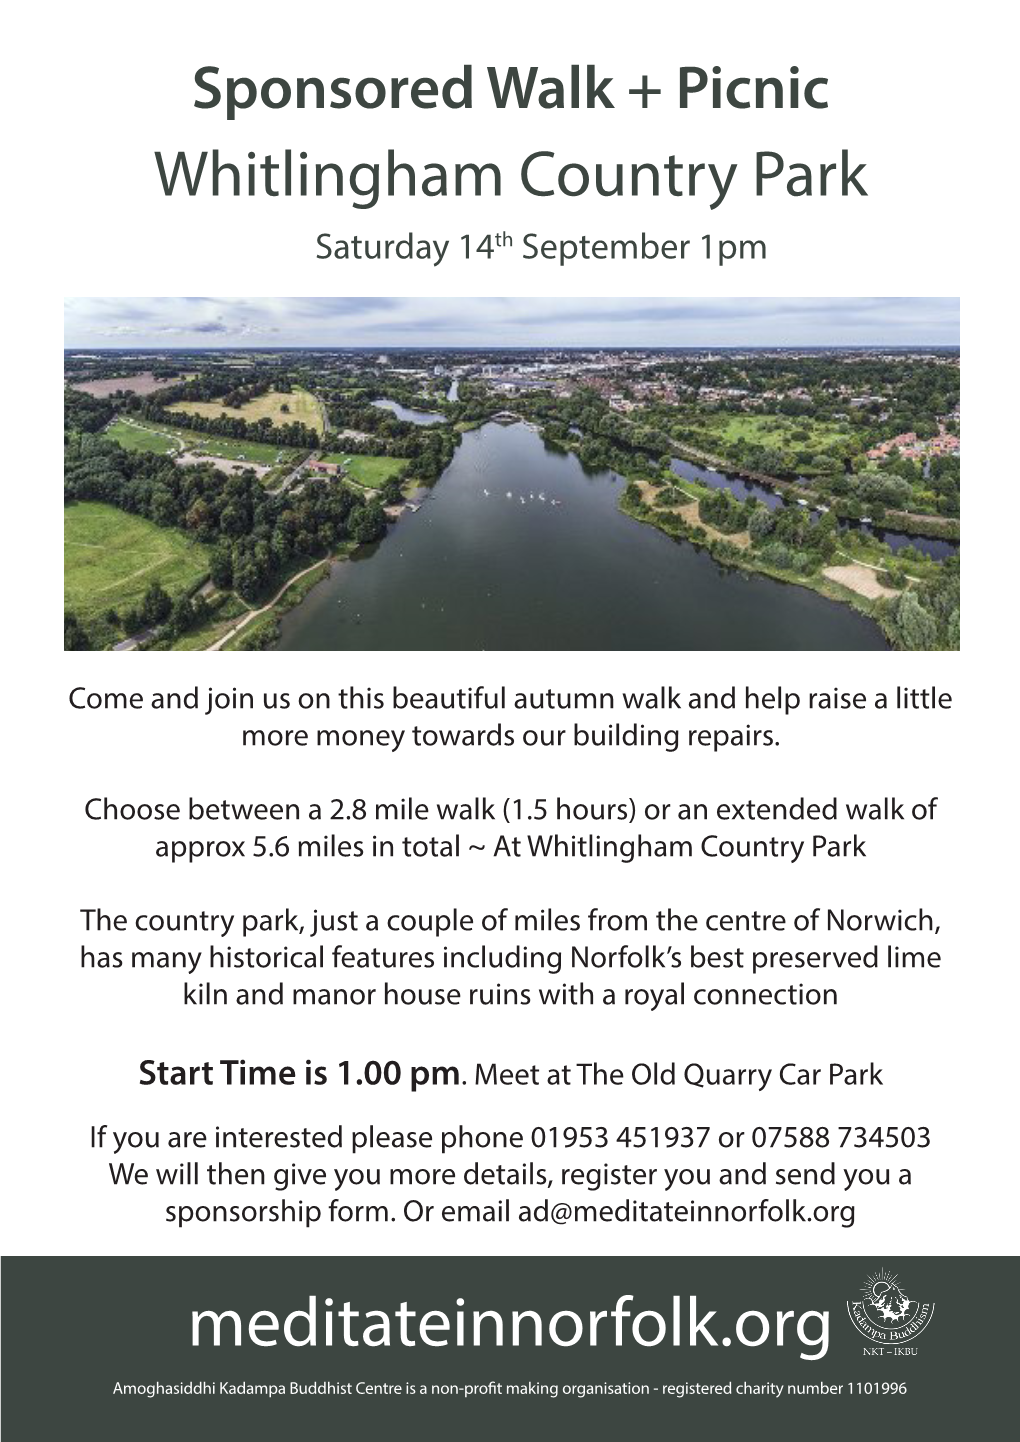 Sponsored Walk + Picnic Whitlingham Country Park Saturday 14Th September 1Pm